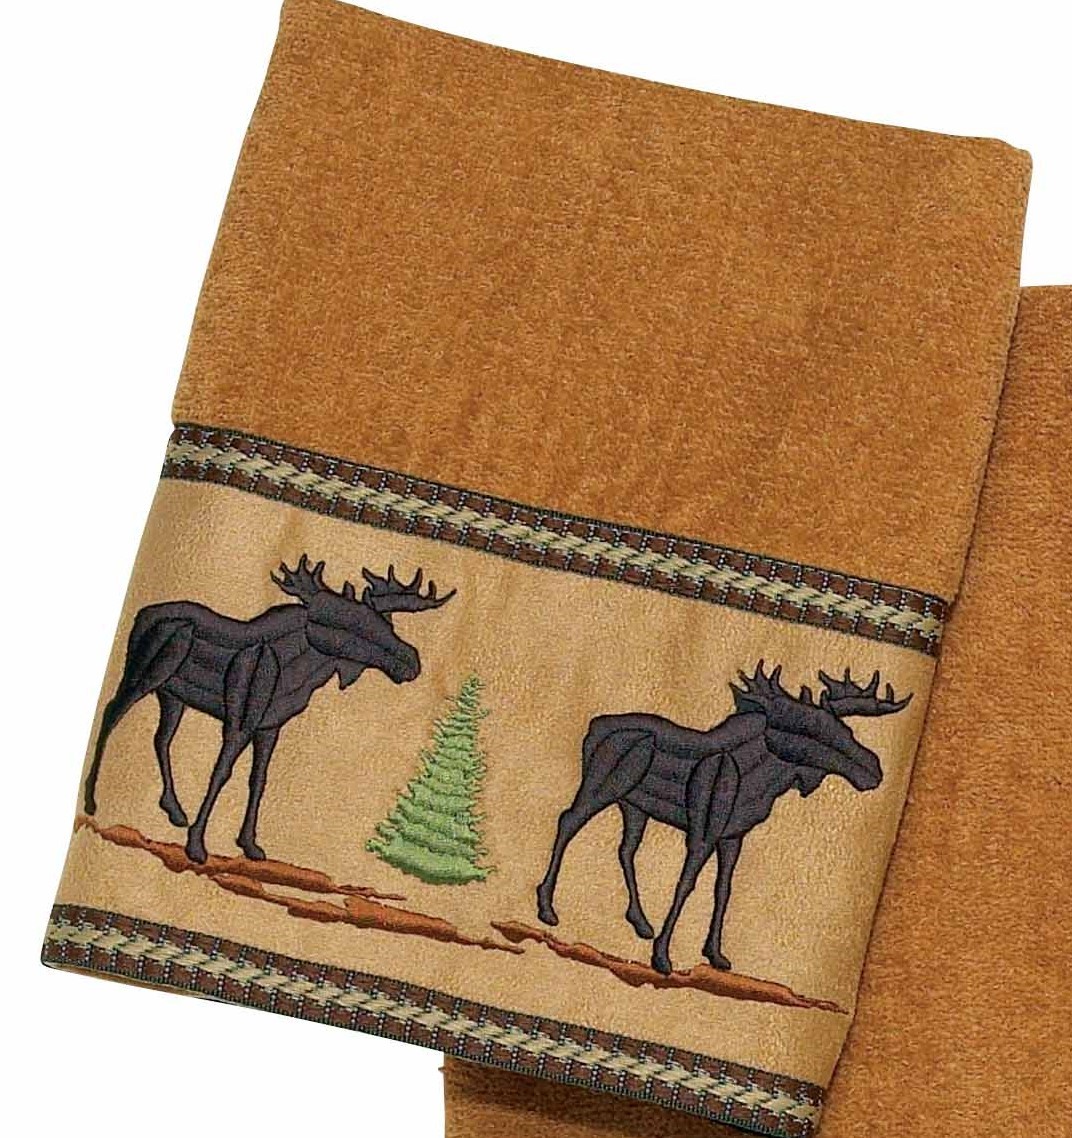 CABIN SCENE Canoe Bear Moose EMBROIDERED SET 2 BATHROOM HAND TOWELS by laura 